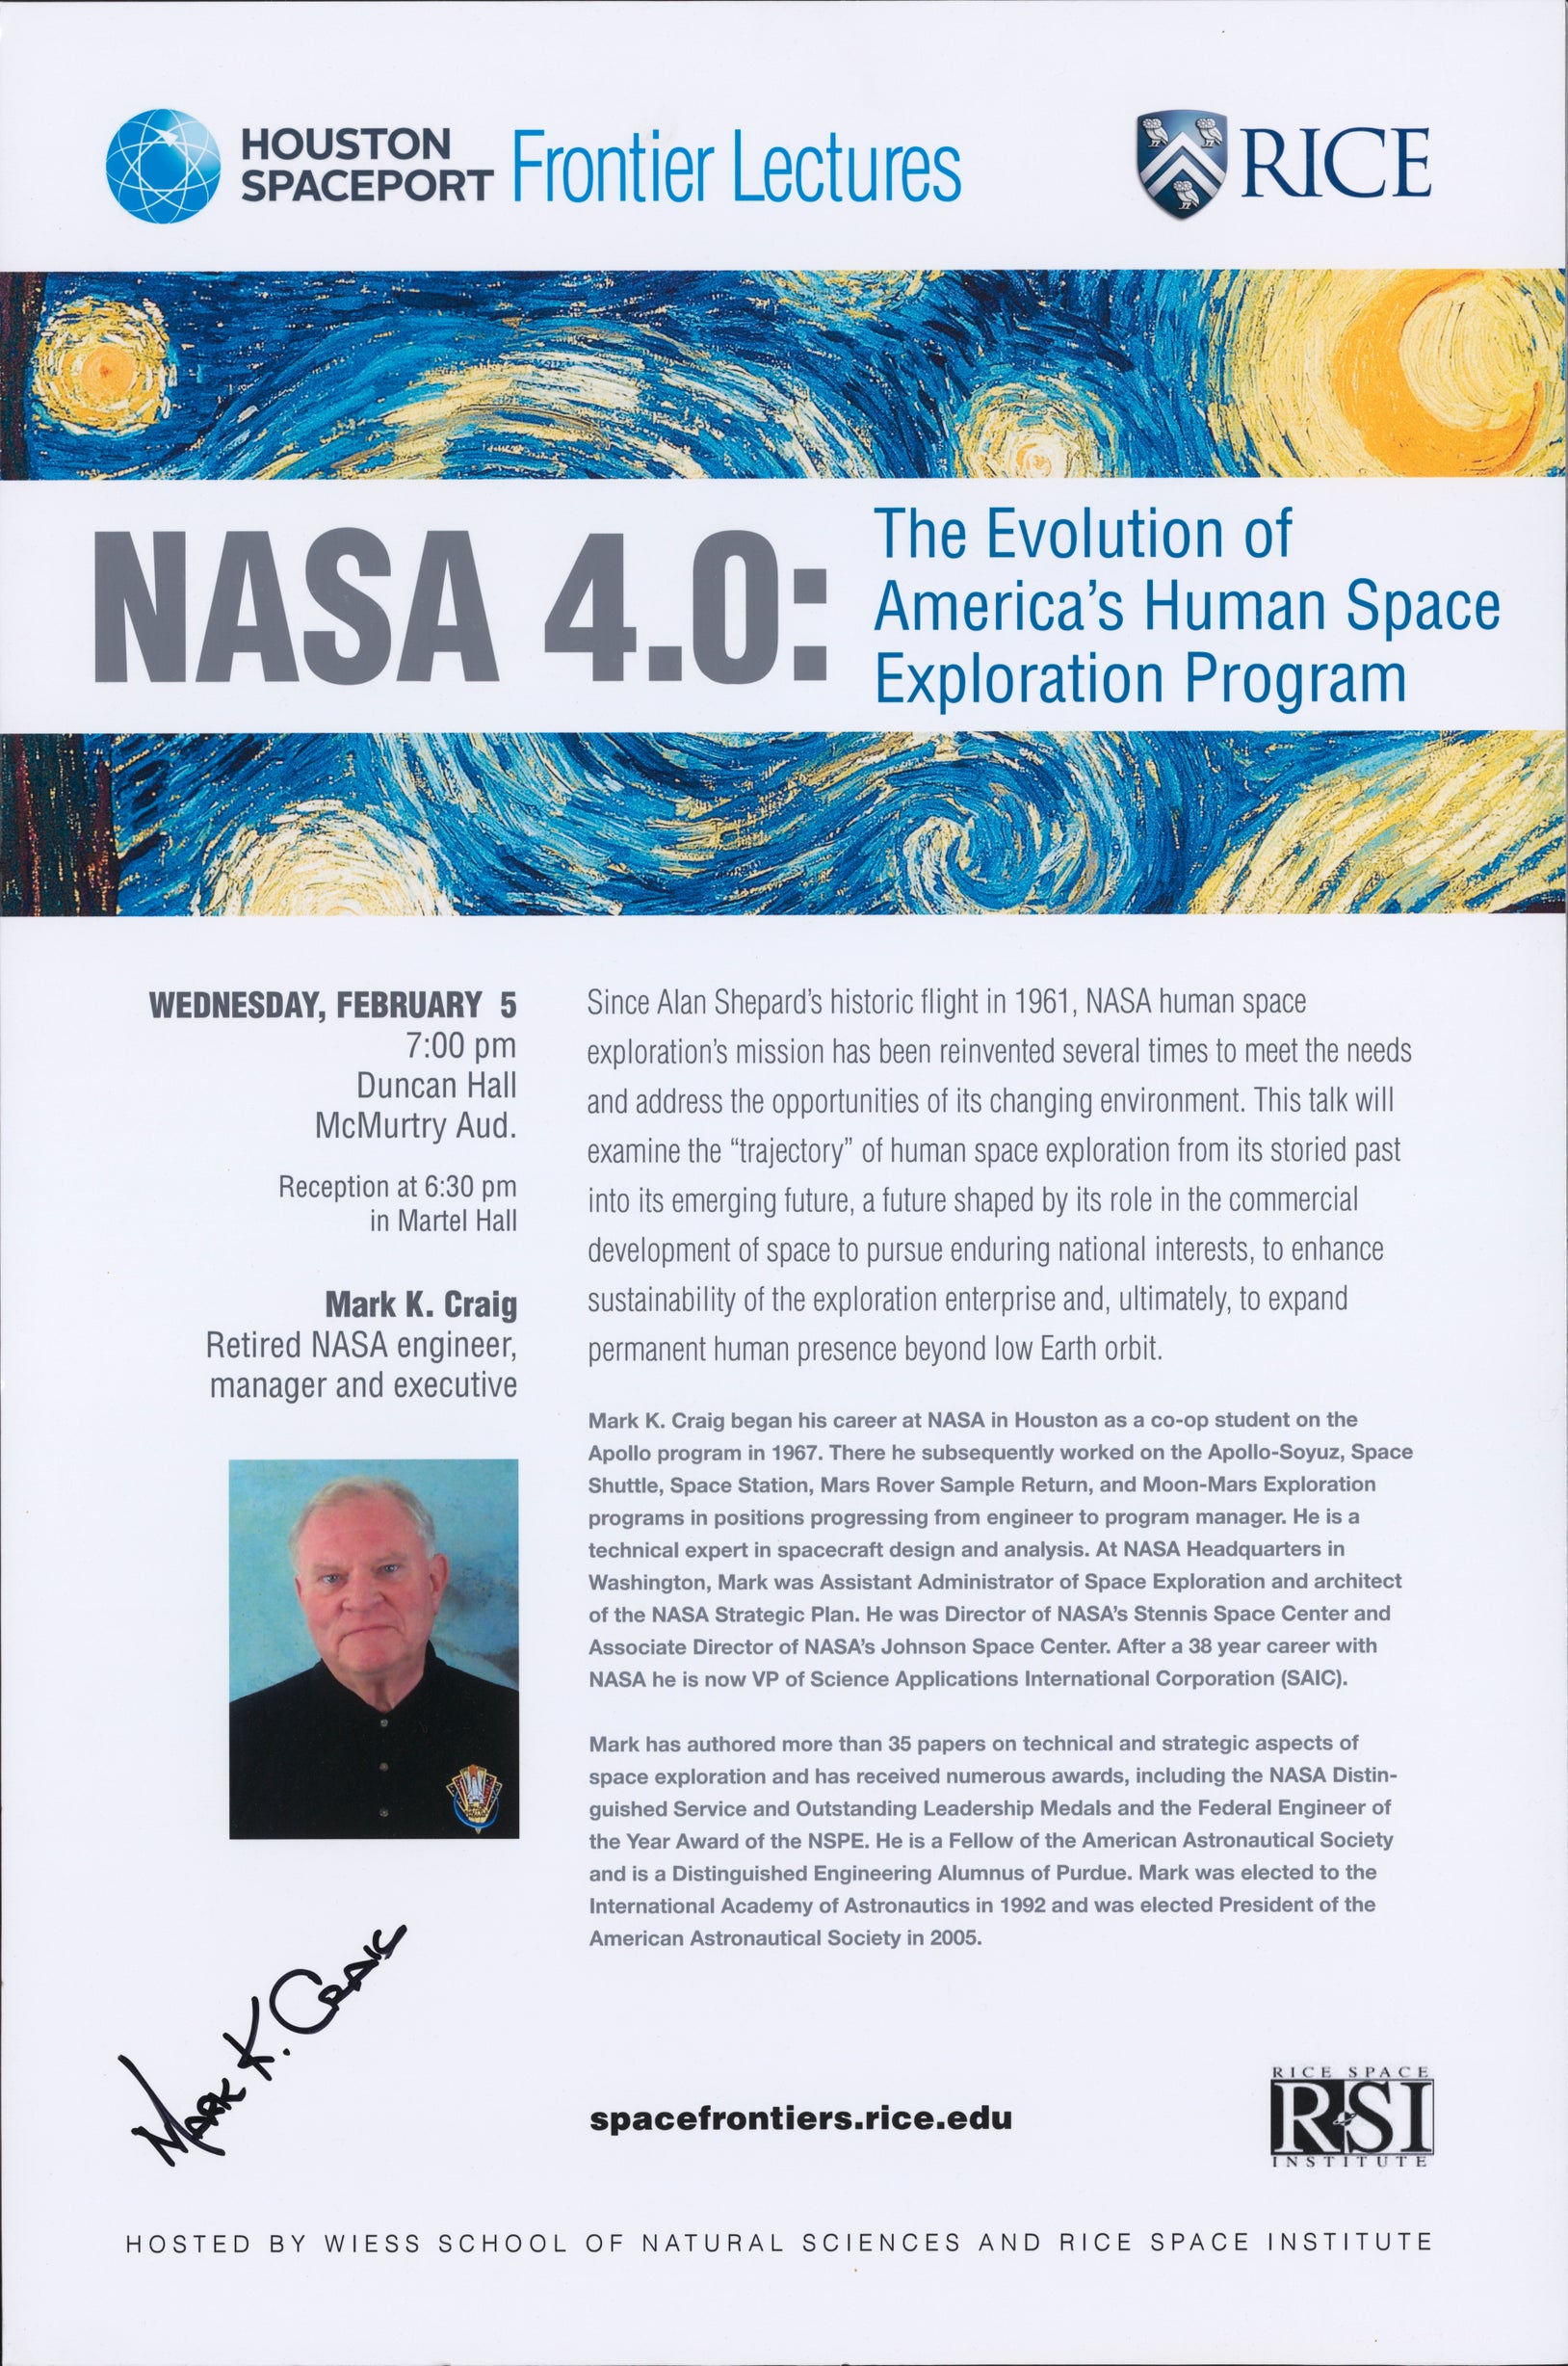 Poster of "NASA 4.0: The Evolution of America’s Human Space Exploration Program" by Mark K. Craig